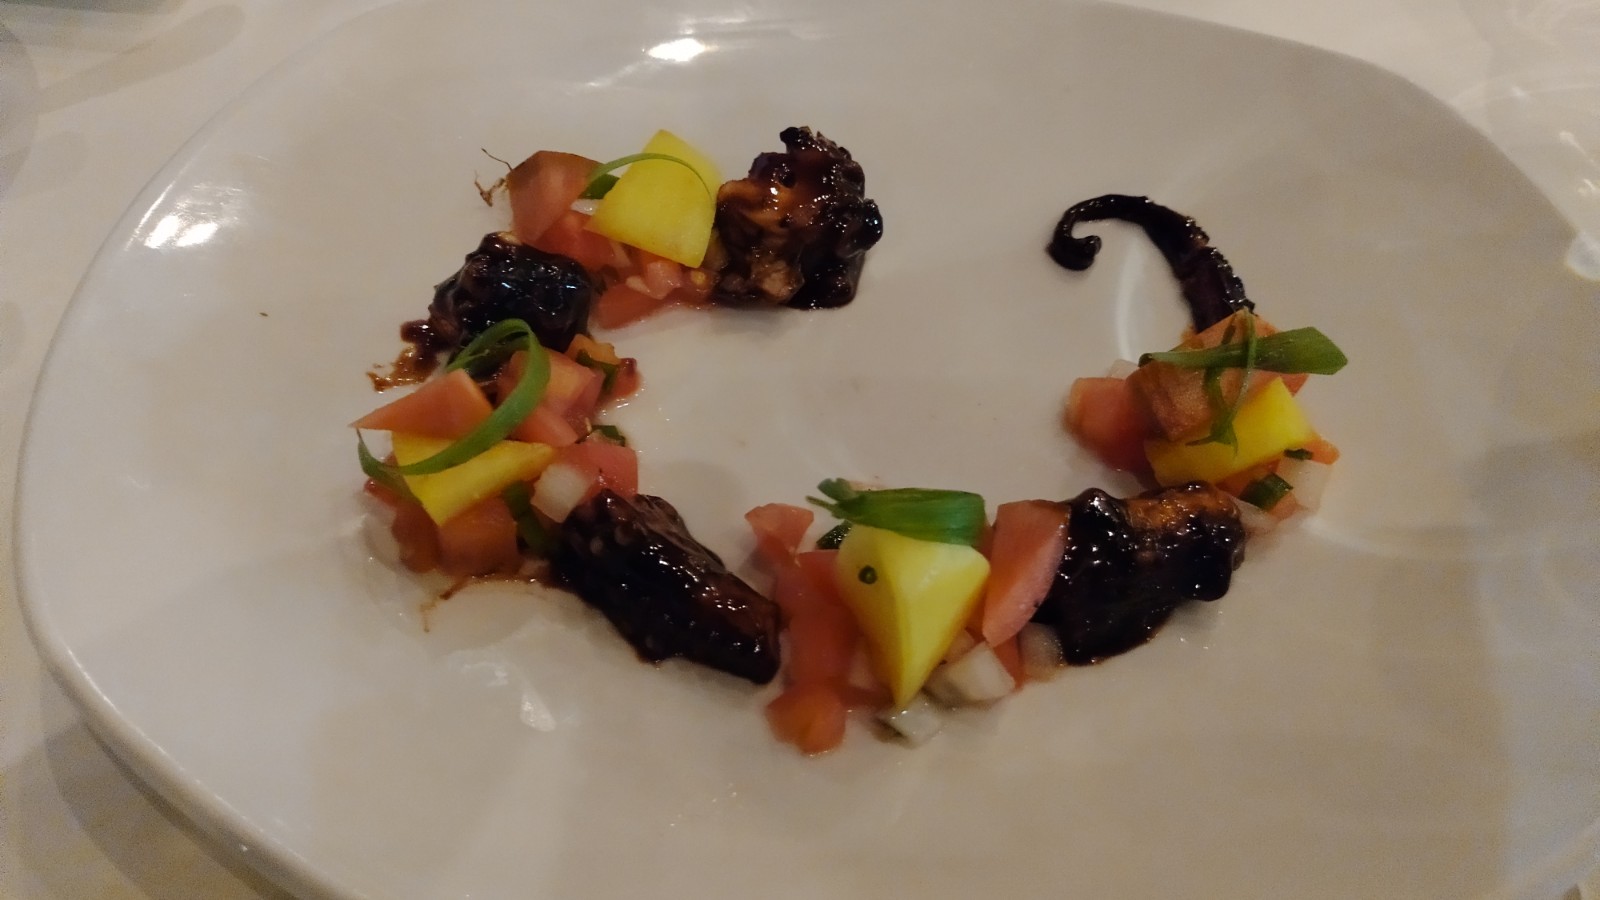 Picture of the grilled octopus dish.